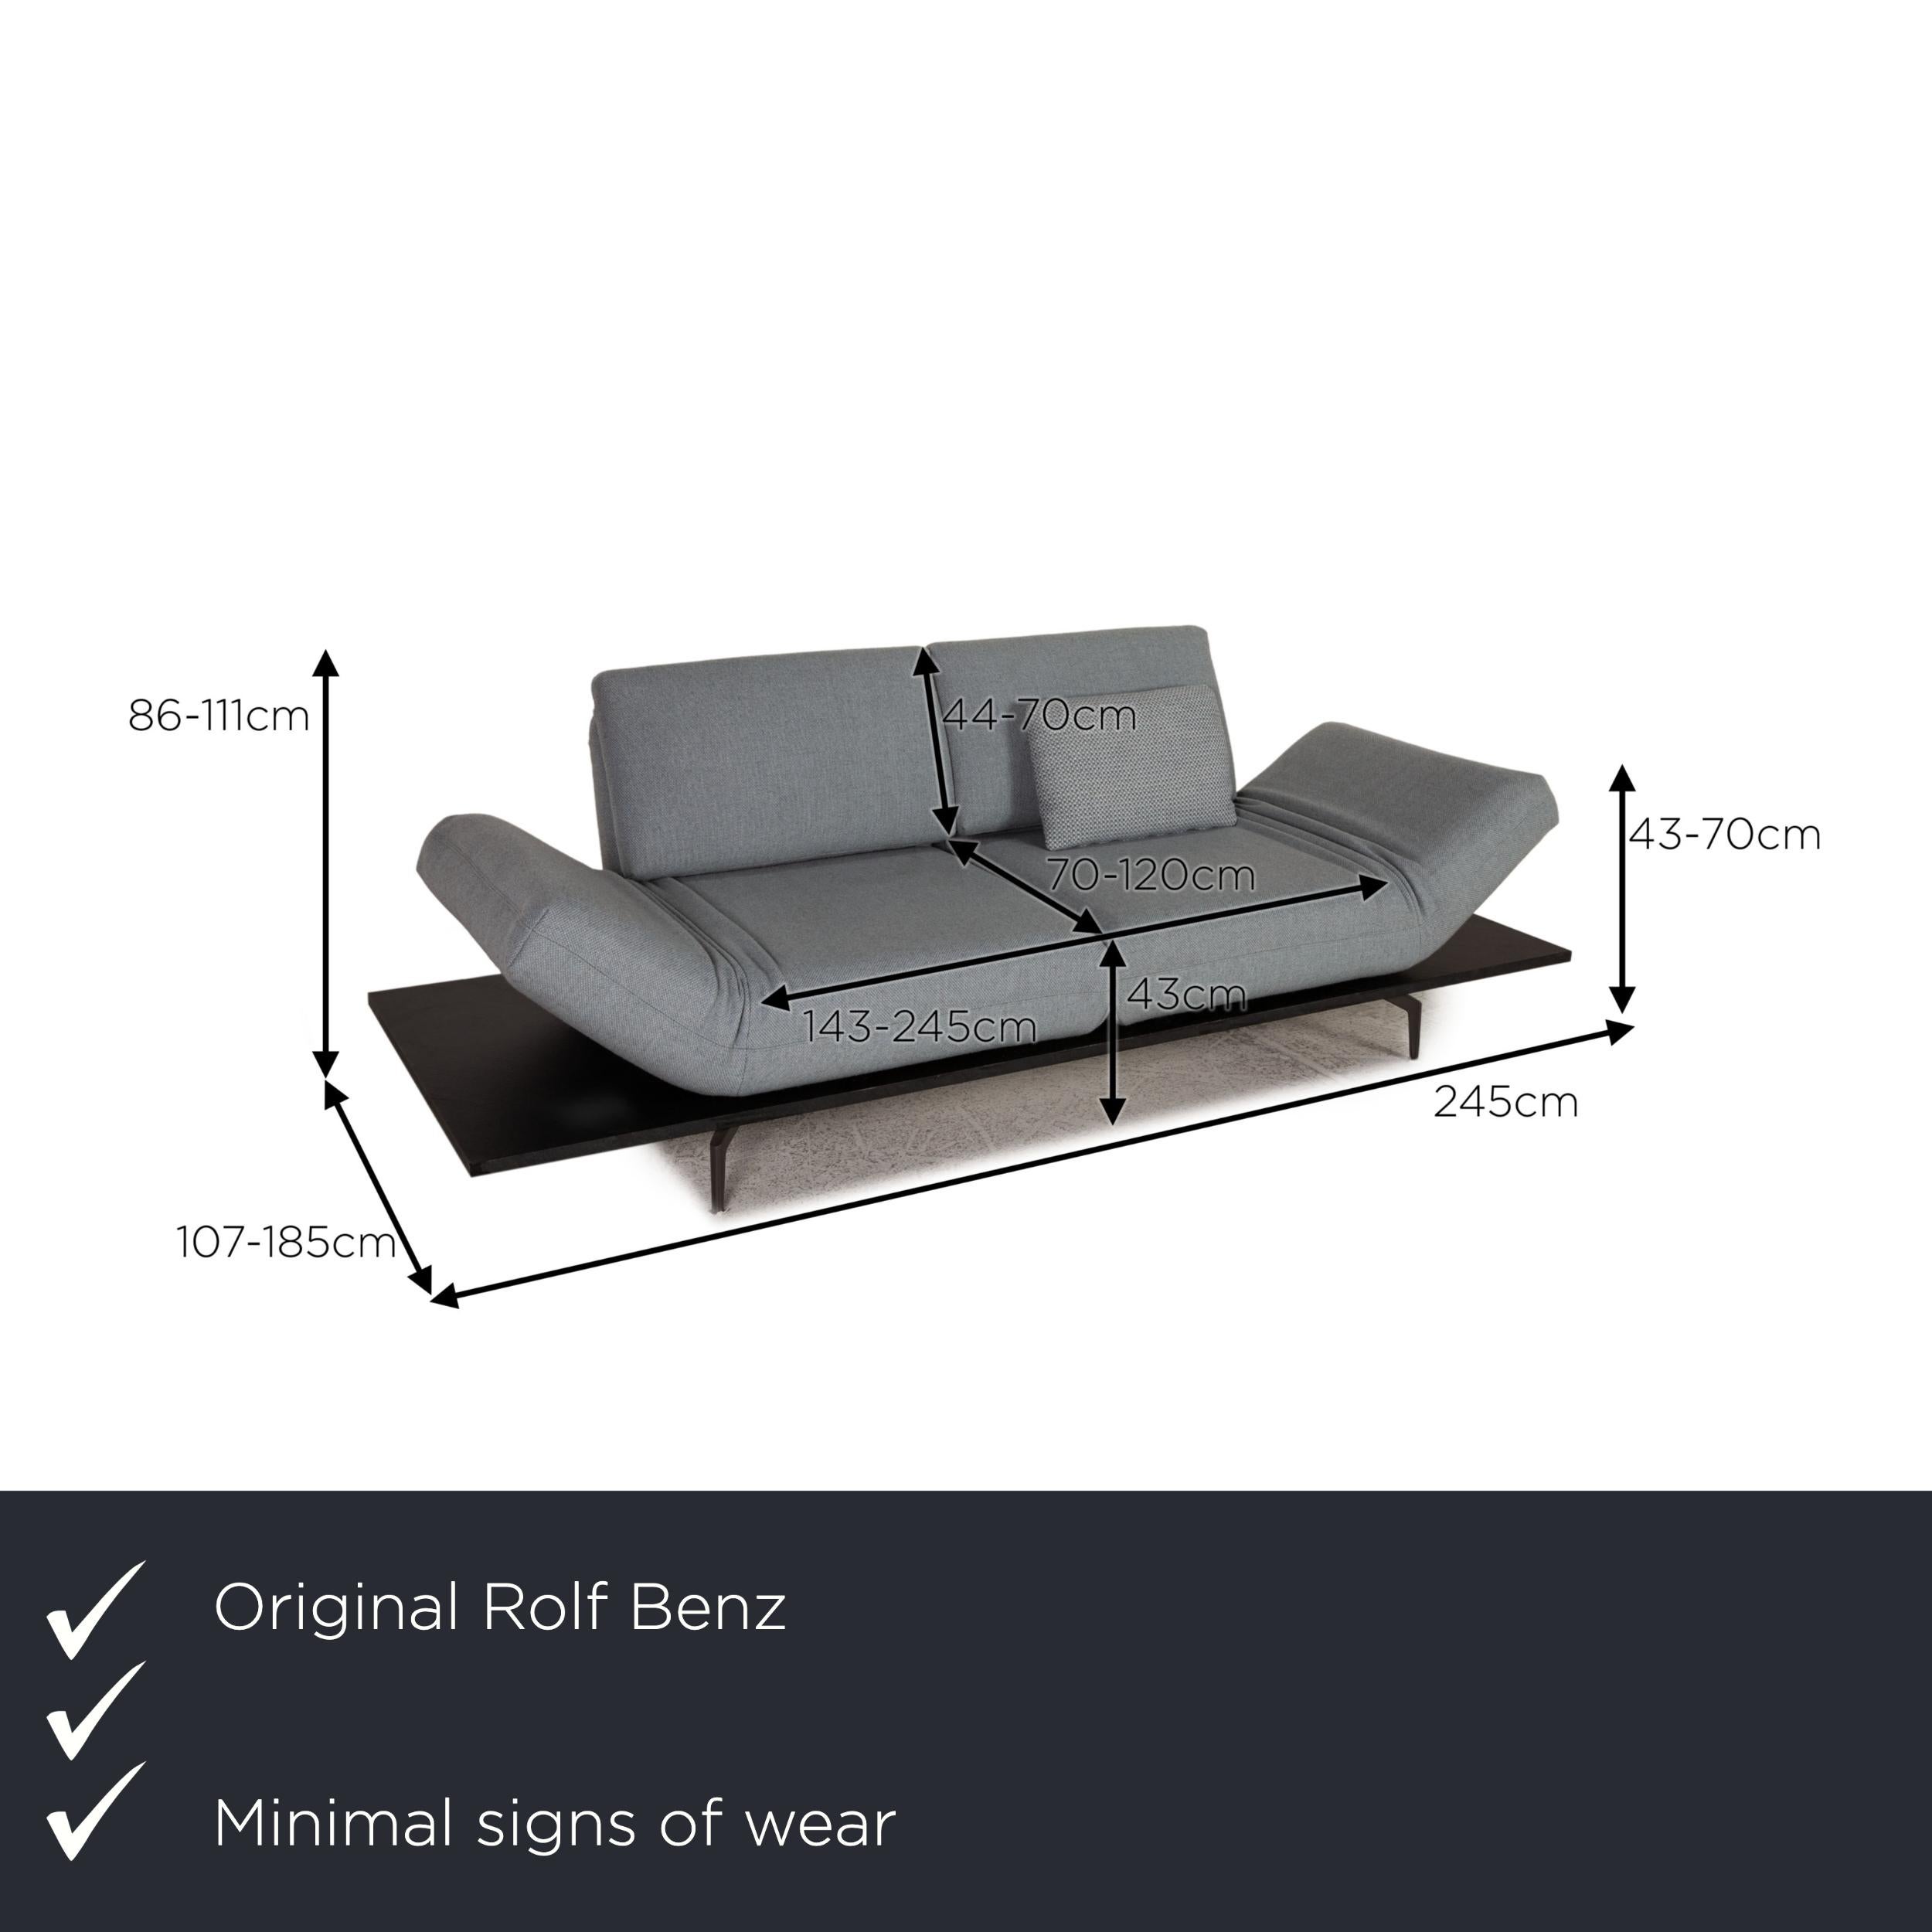 We present to you a Rolf Benz aura fabric sofa ice blue two-seater couch function relaxation.

Product measurements in centimeters:

depth: 107
width: 245
height: 86
seat height: 43
rest height: 43
seat depth: 70
seat width: 143
back